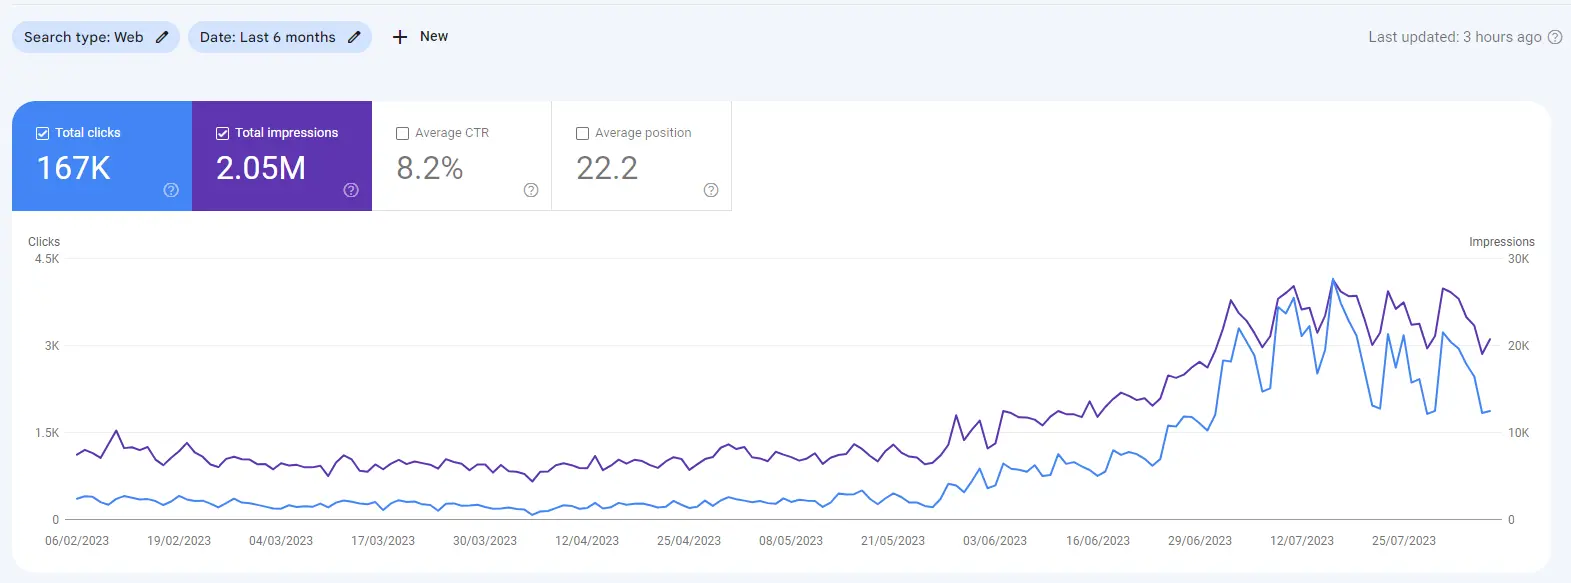 SEO results in 6 months